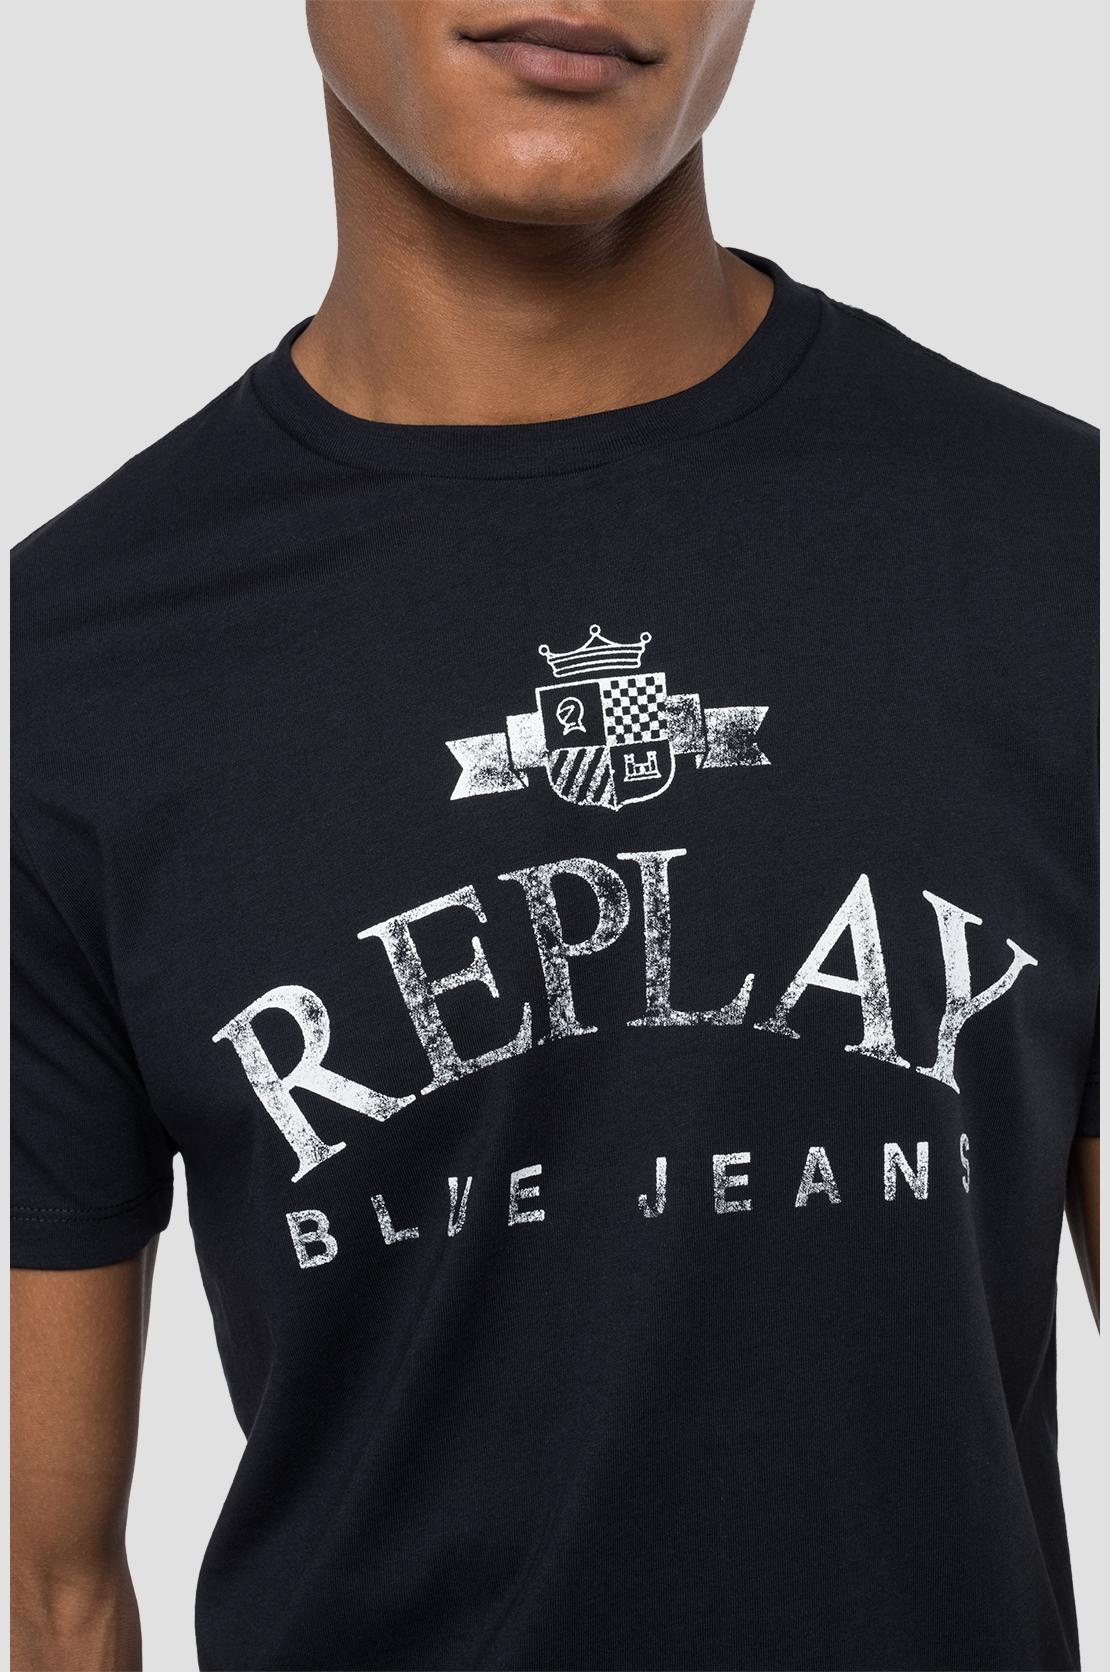 Black The Colour Cotton Solid (M3141) Organic 515 Replay T-Shirt - -